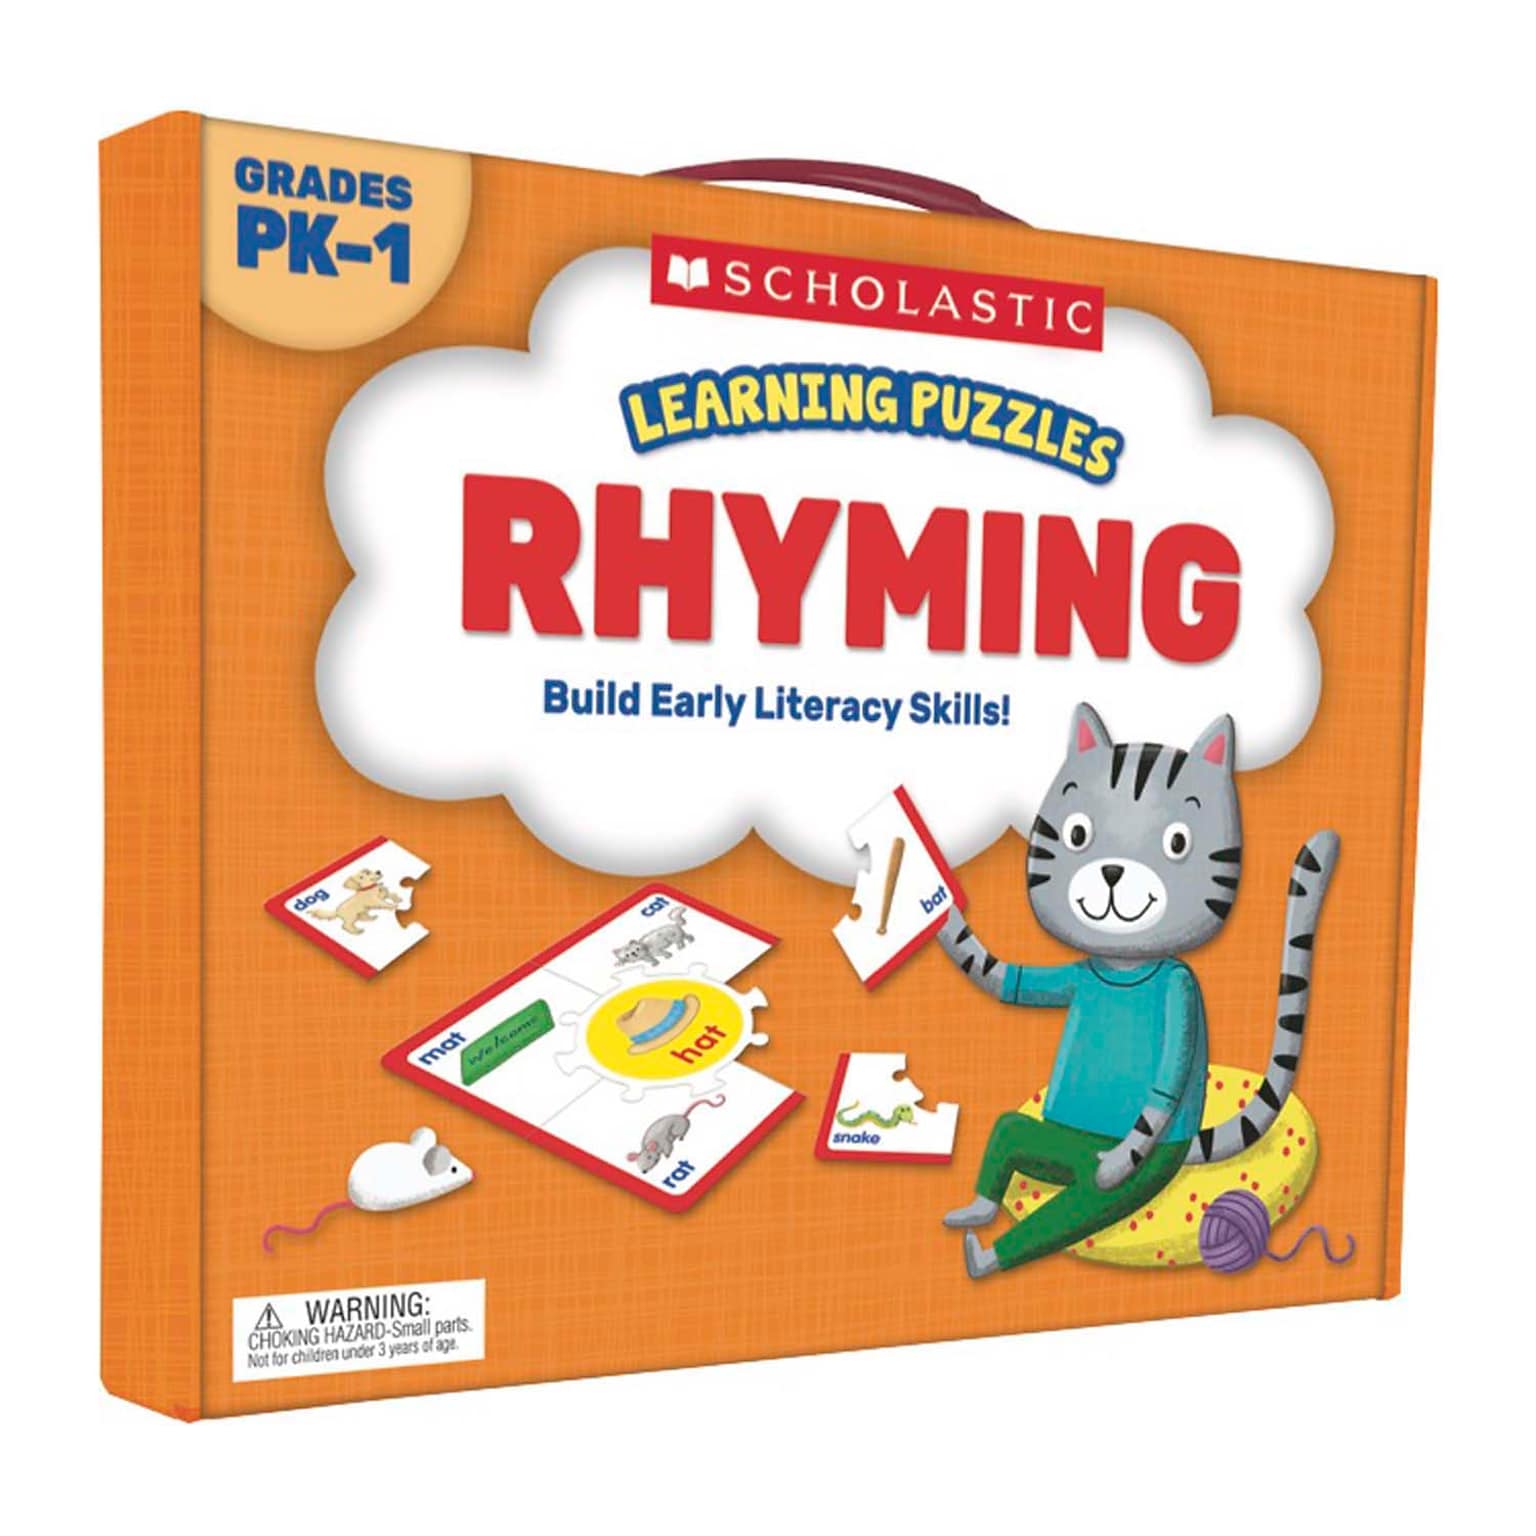 Scholastic Learning Puzzles: Rhyming, Grades PreK-1 (SC-823973)